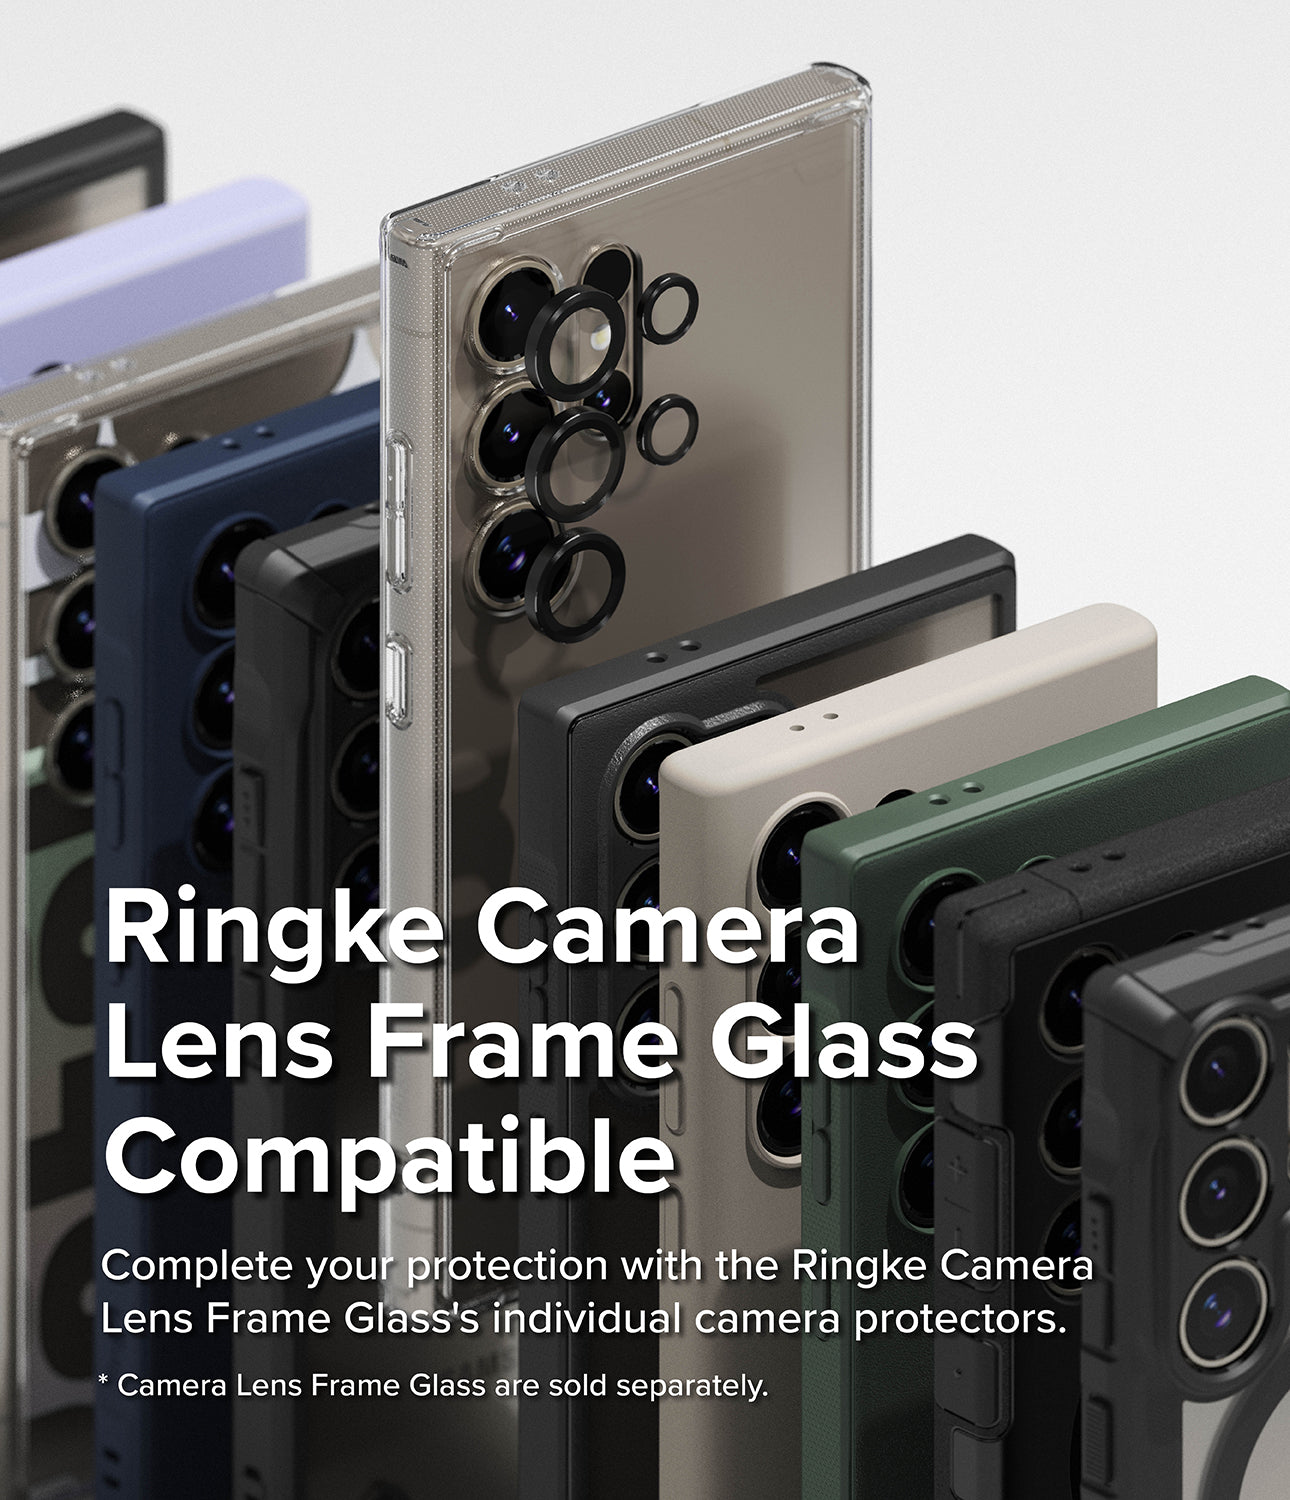 Galaxy S24 Ultra Case | Fusion-X - Black - Ringke Camera Lens Frame Glass Compatible. Complete your protection with the Ringke Camera Lens Frame Glass' individual camera protectors.